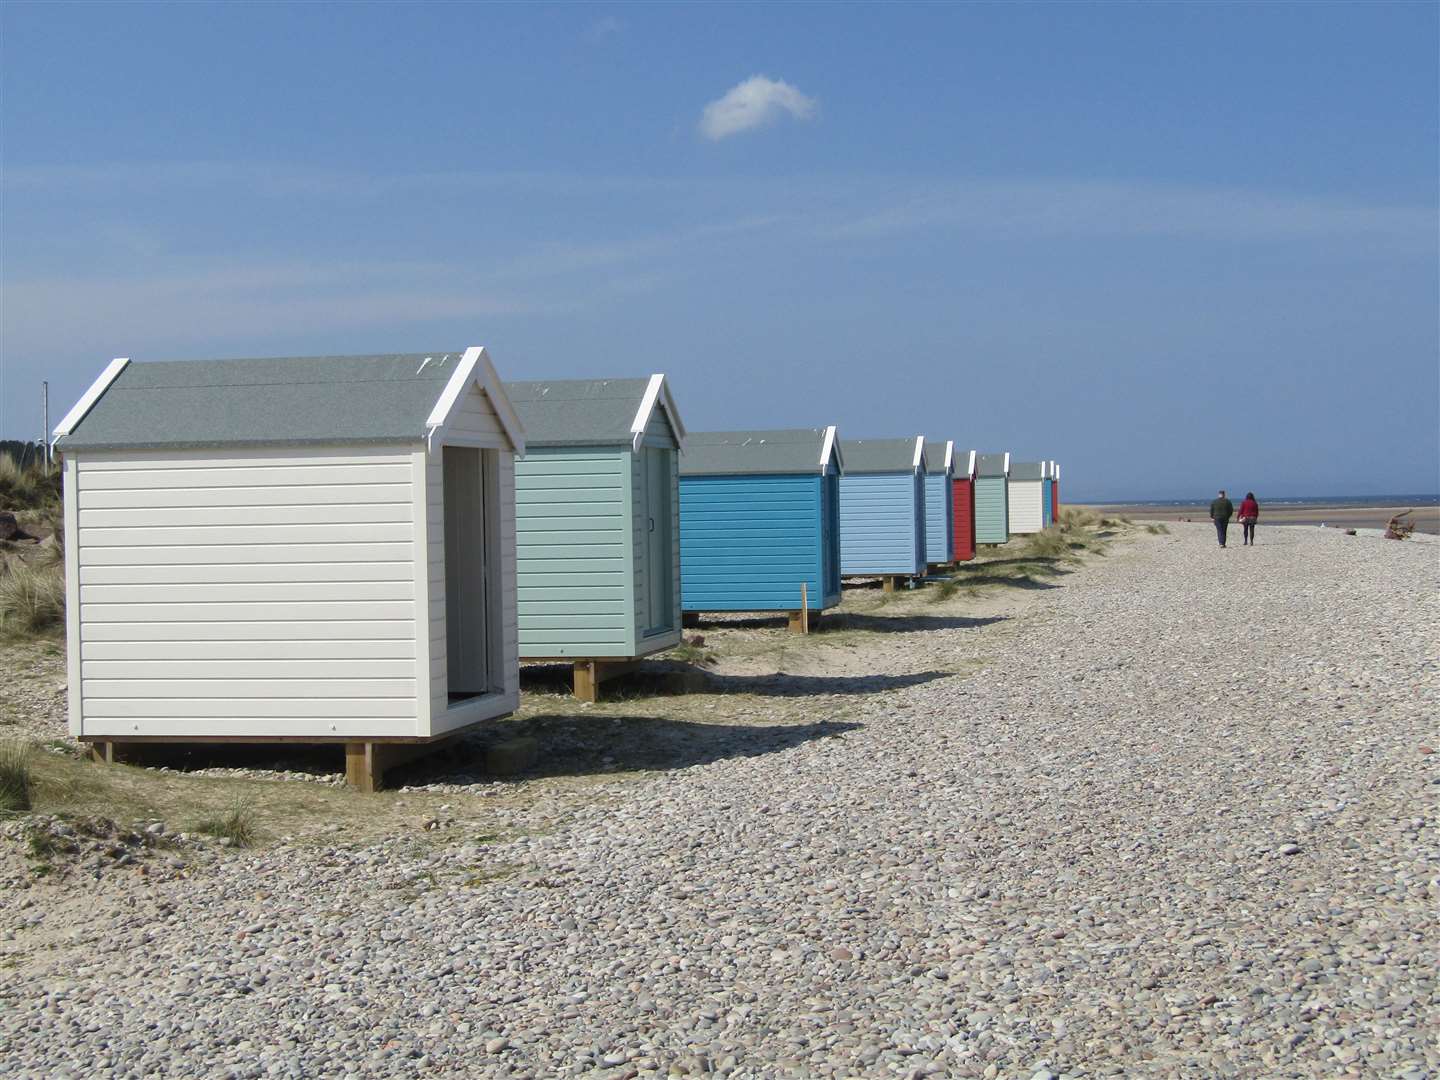 This photograph of the beach huts at Findhorn was taken before lockdown by Alan Fraser, from Lhanbryde.